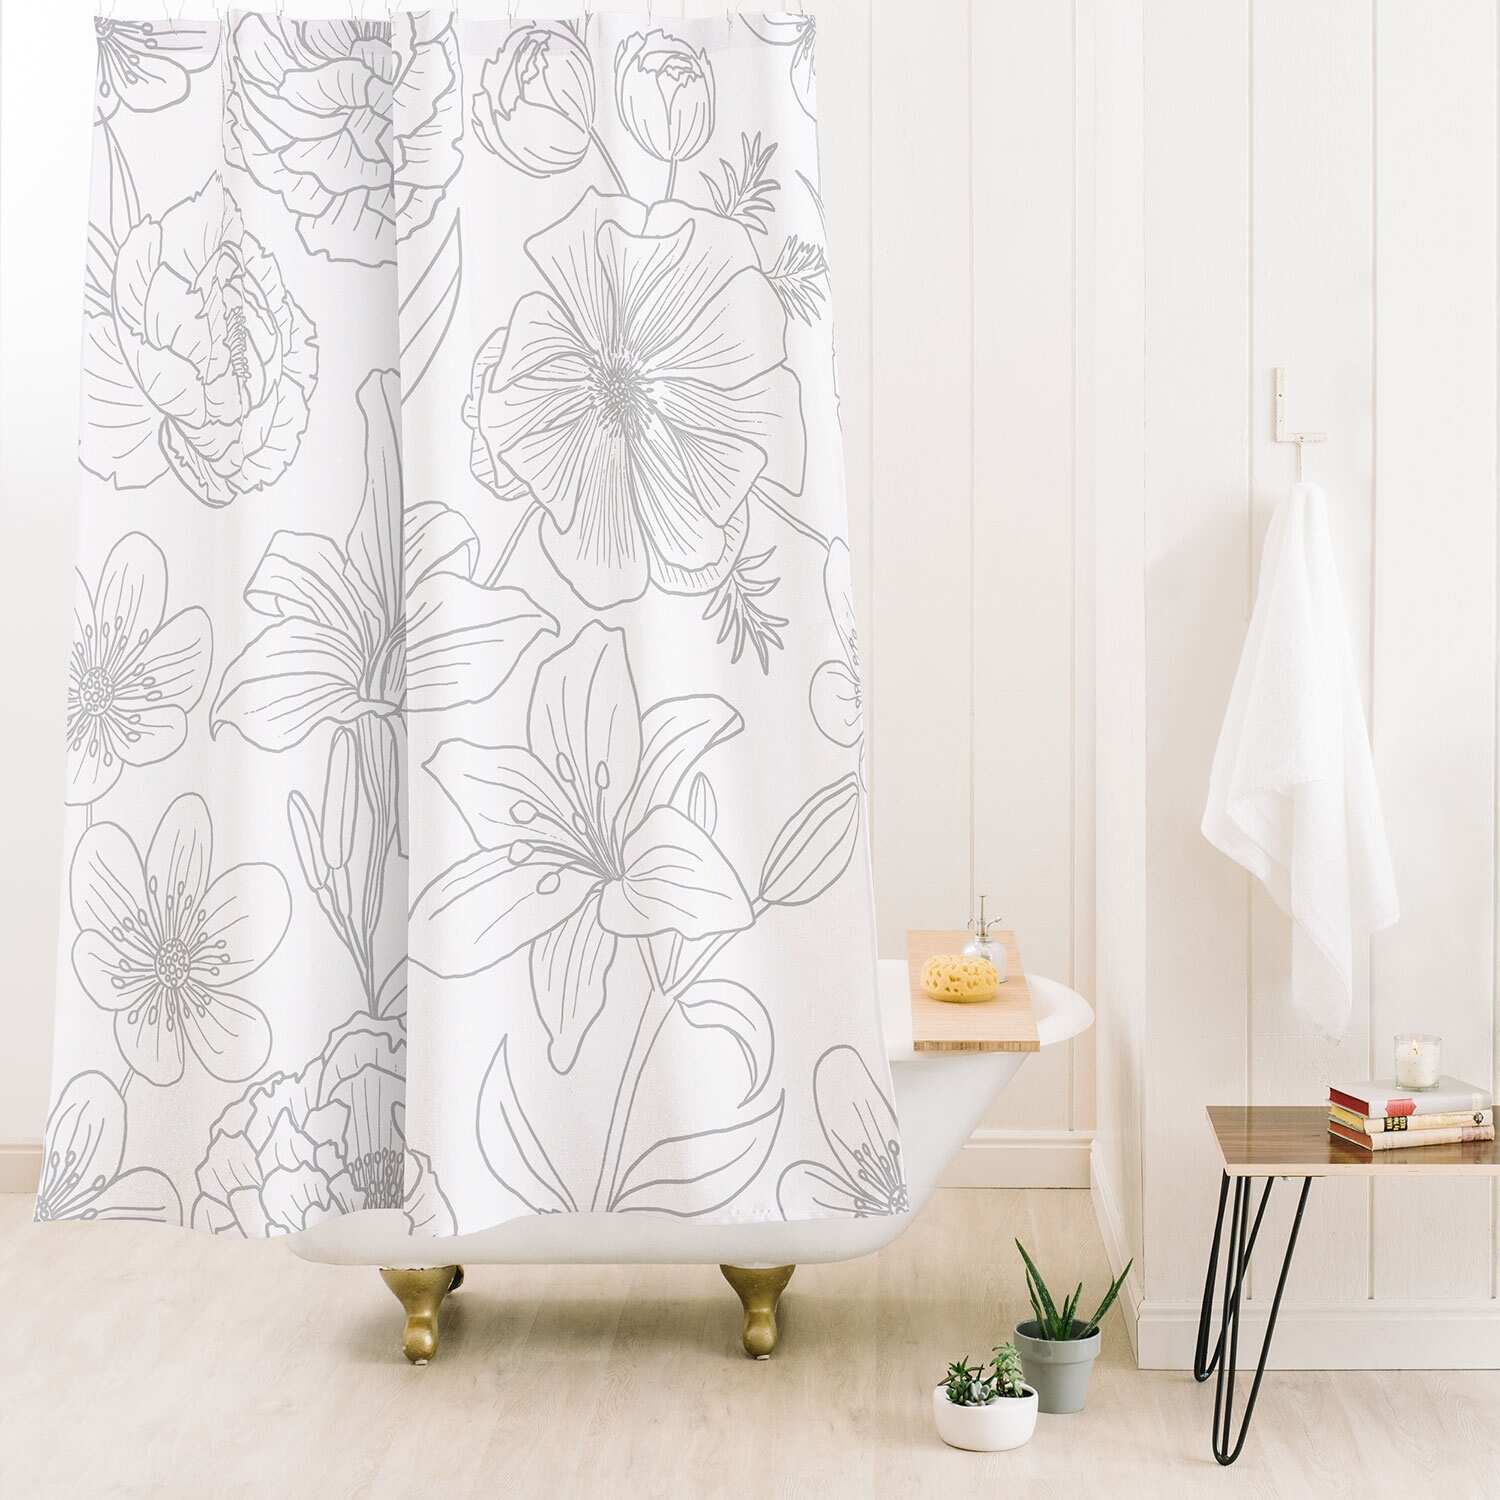 Emanuela Carratoni Line Art Floral Theme Made to Order Shower Curtain 71" x 74" with Liner - 71" x 74"